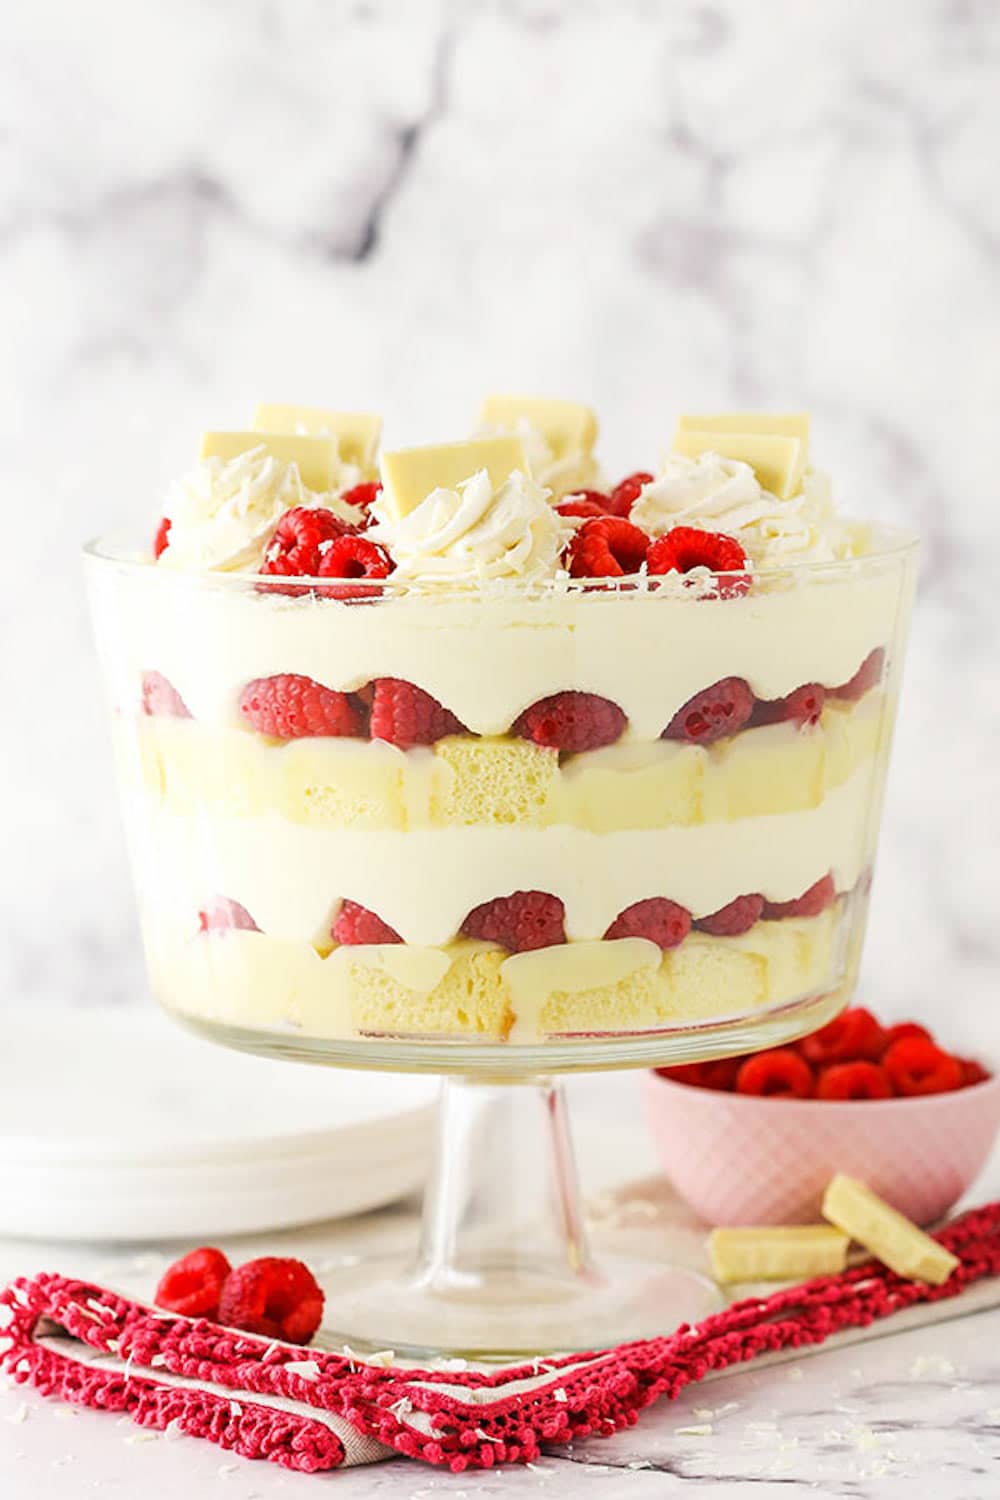 A White Chocolate Raspberry Trifle in a Clear Dish on Top of a Cloth Napkin.